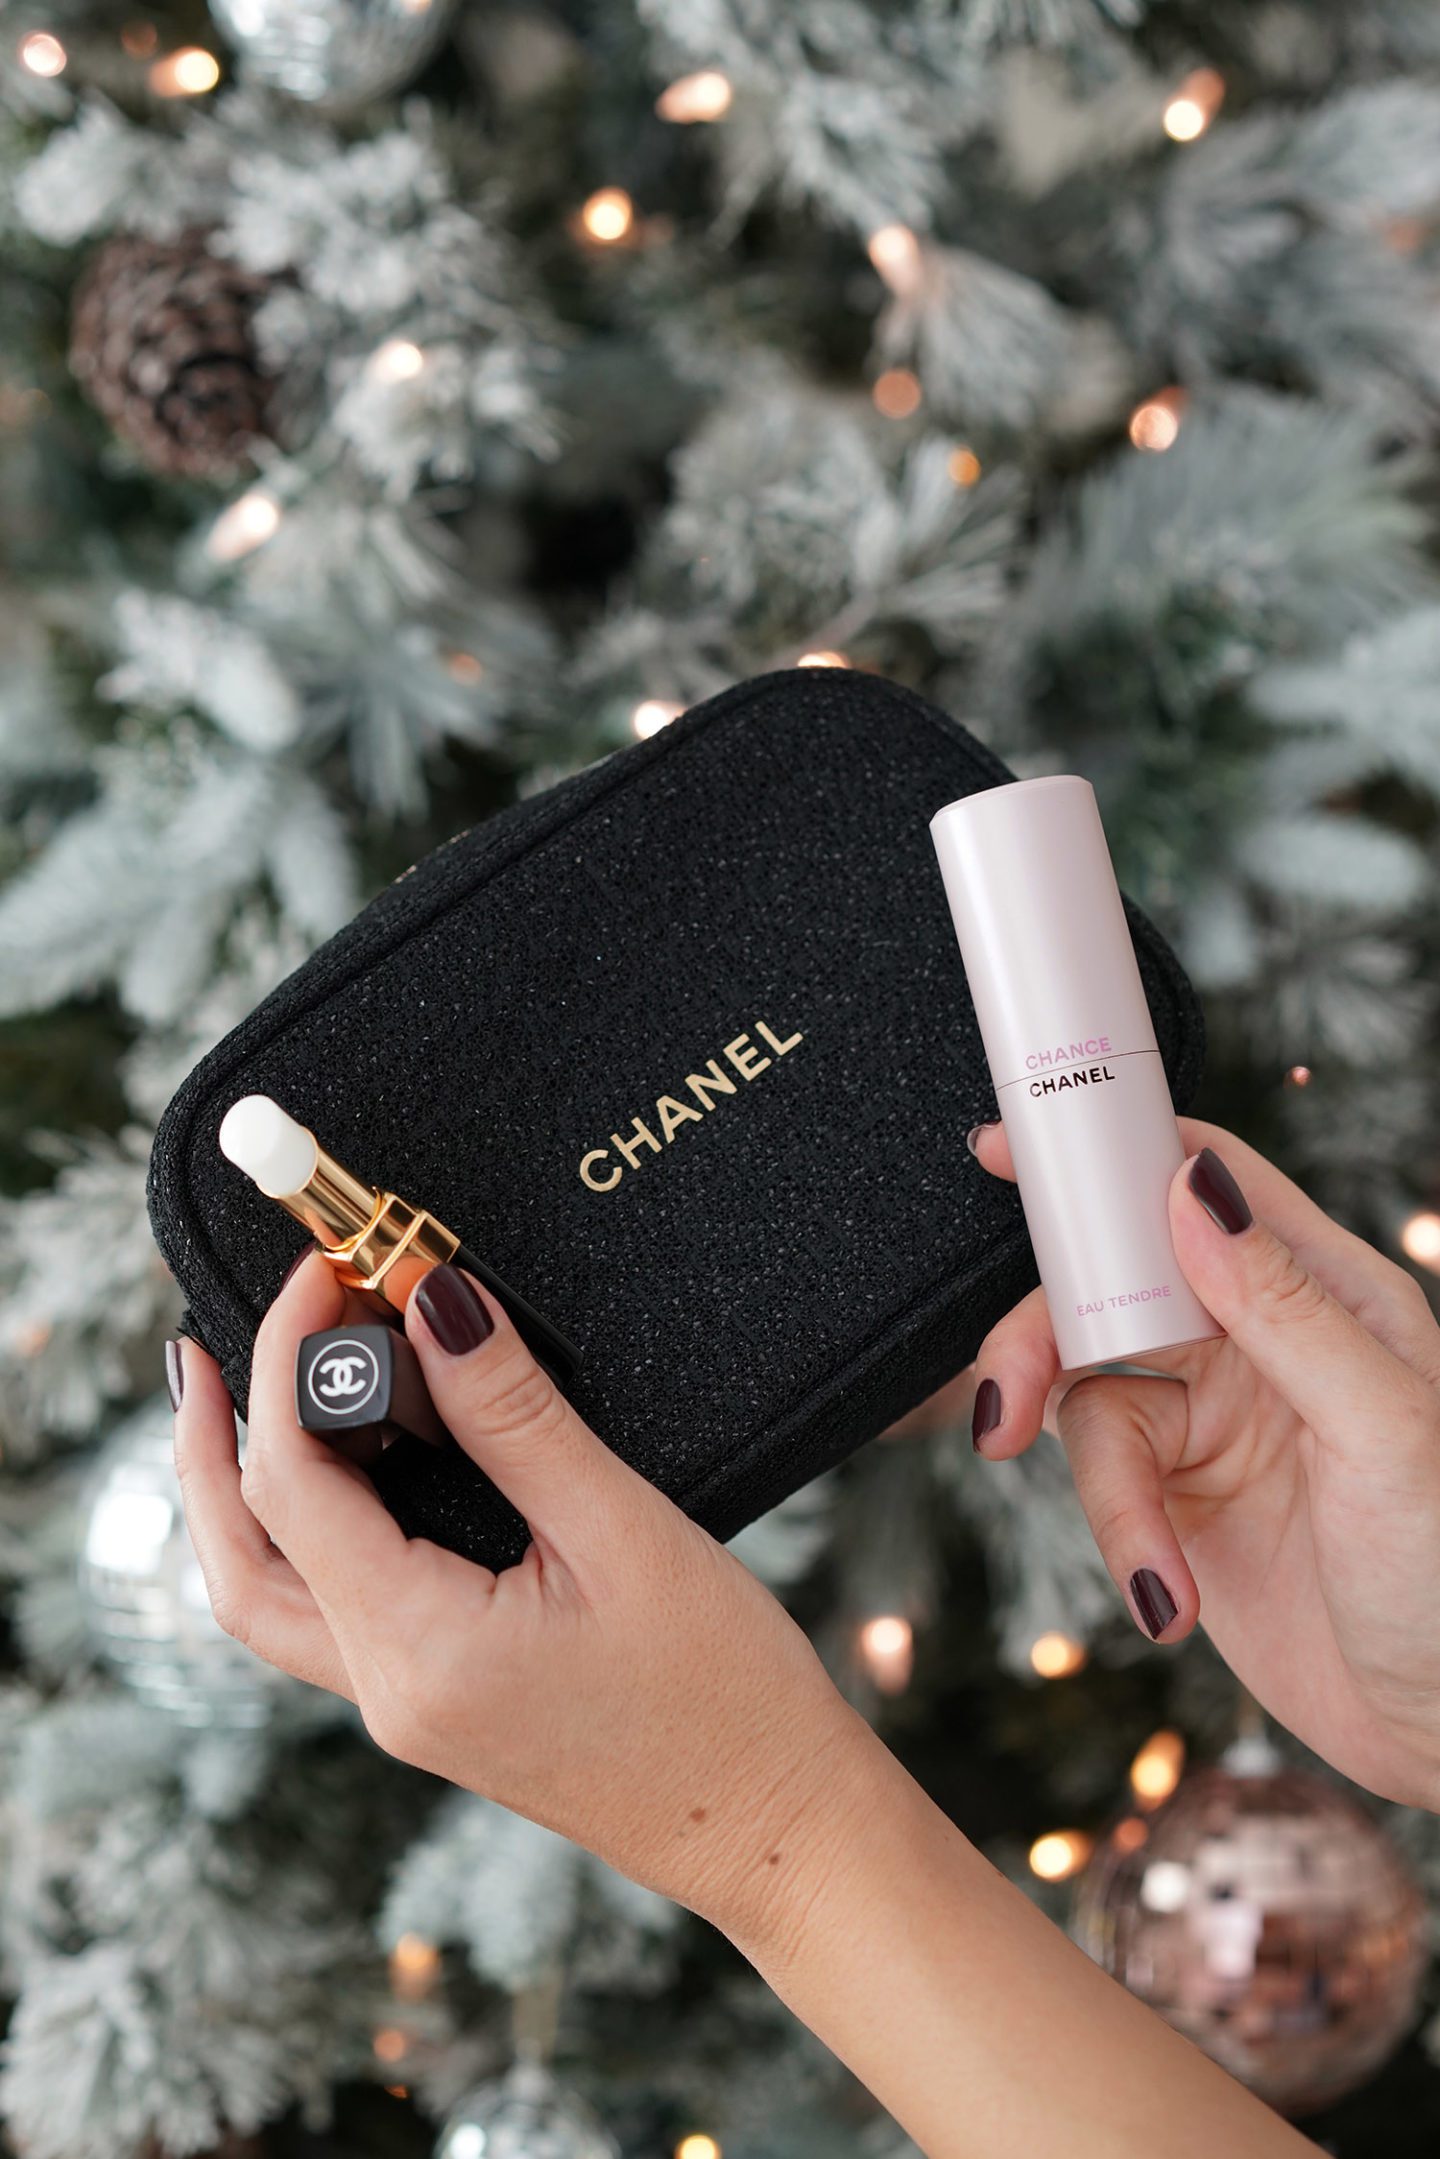 Chanel Cyber Monday Beauty to Go Set 2021